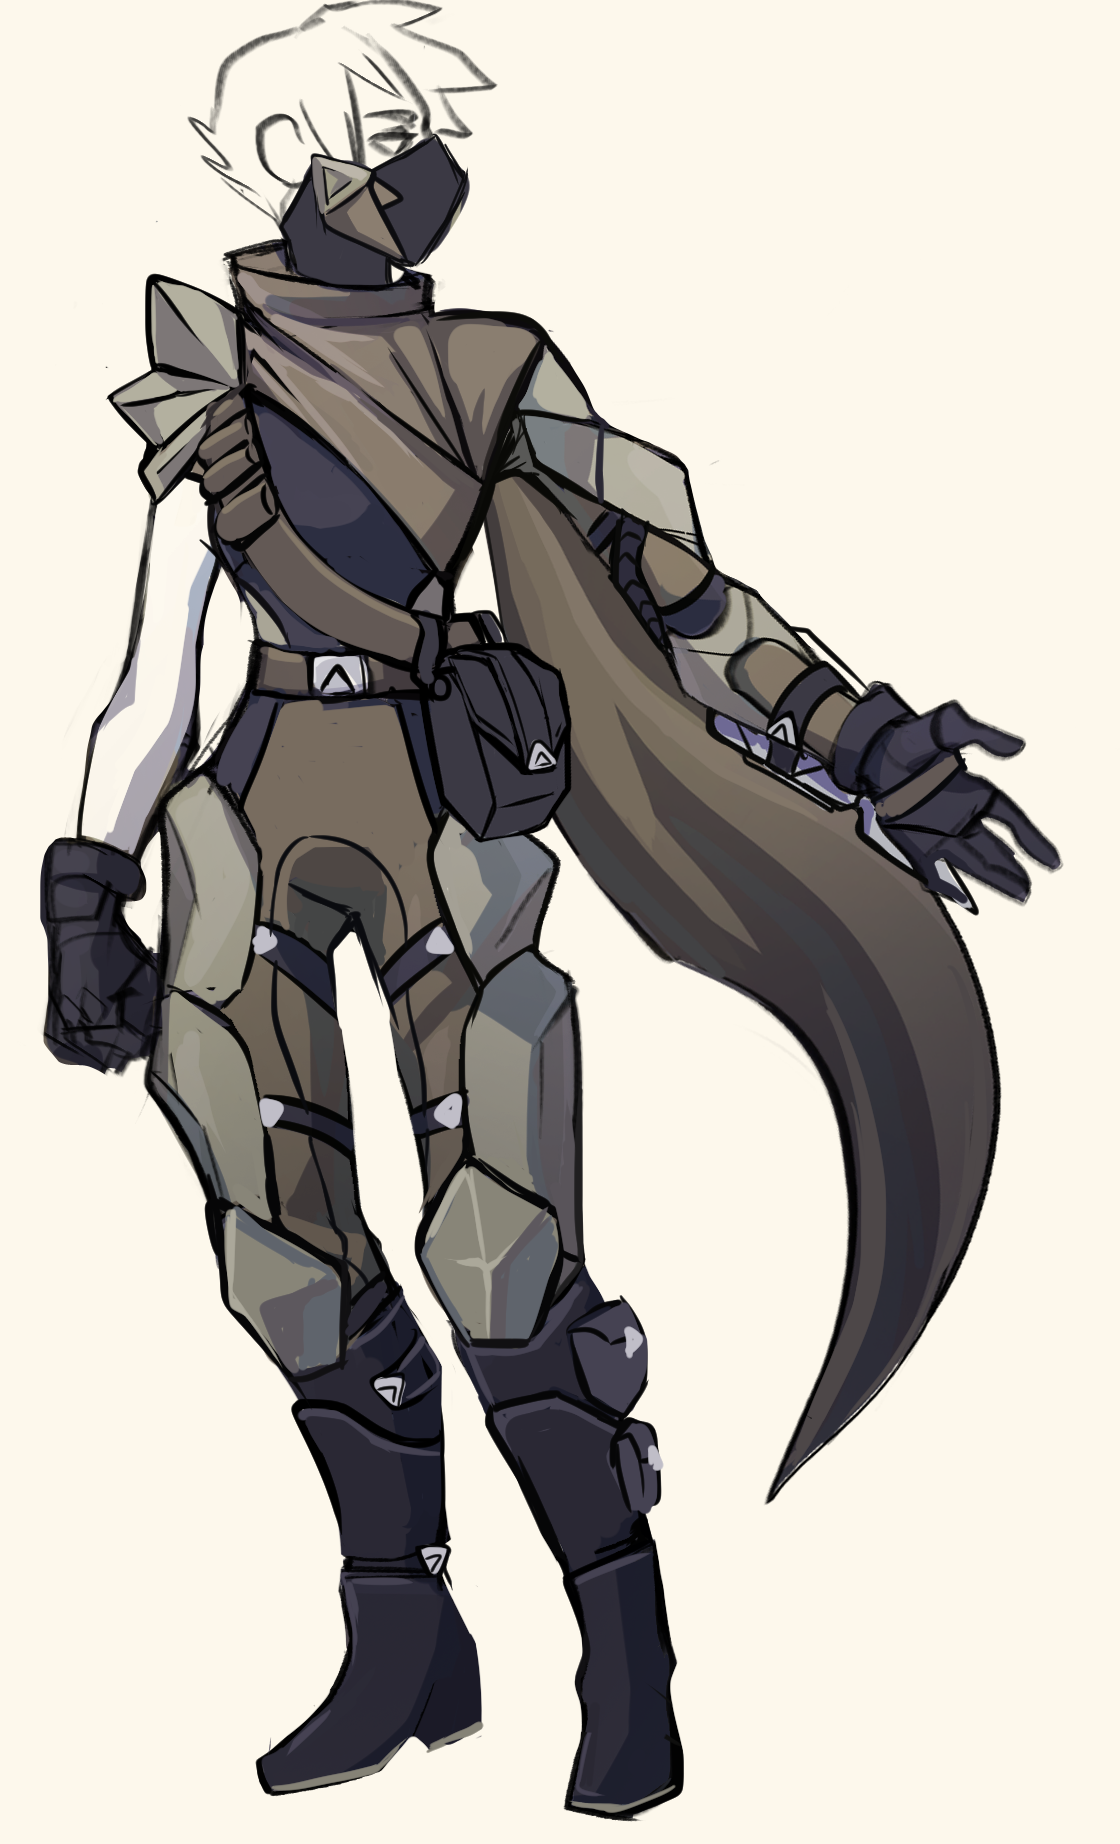 This design was a military type, but somewhat scavenged (the asymmetric cloak/scarf), a kind of mid-to-high tier outfit. Practical.